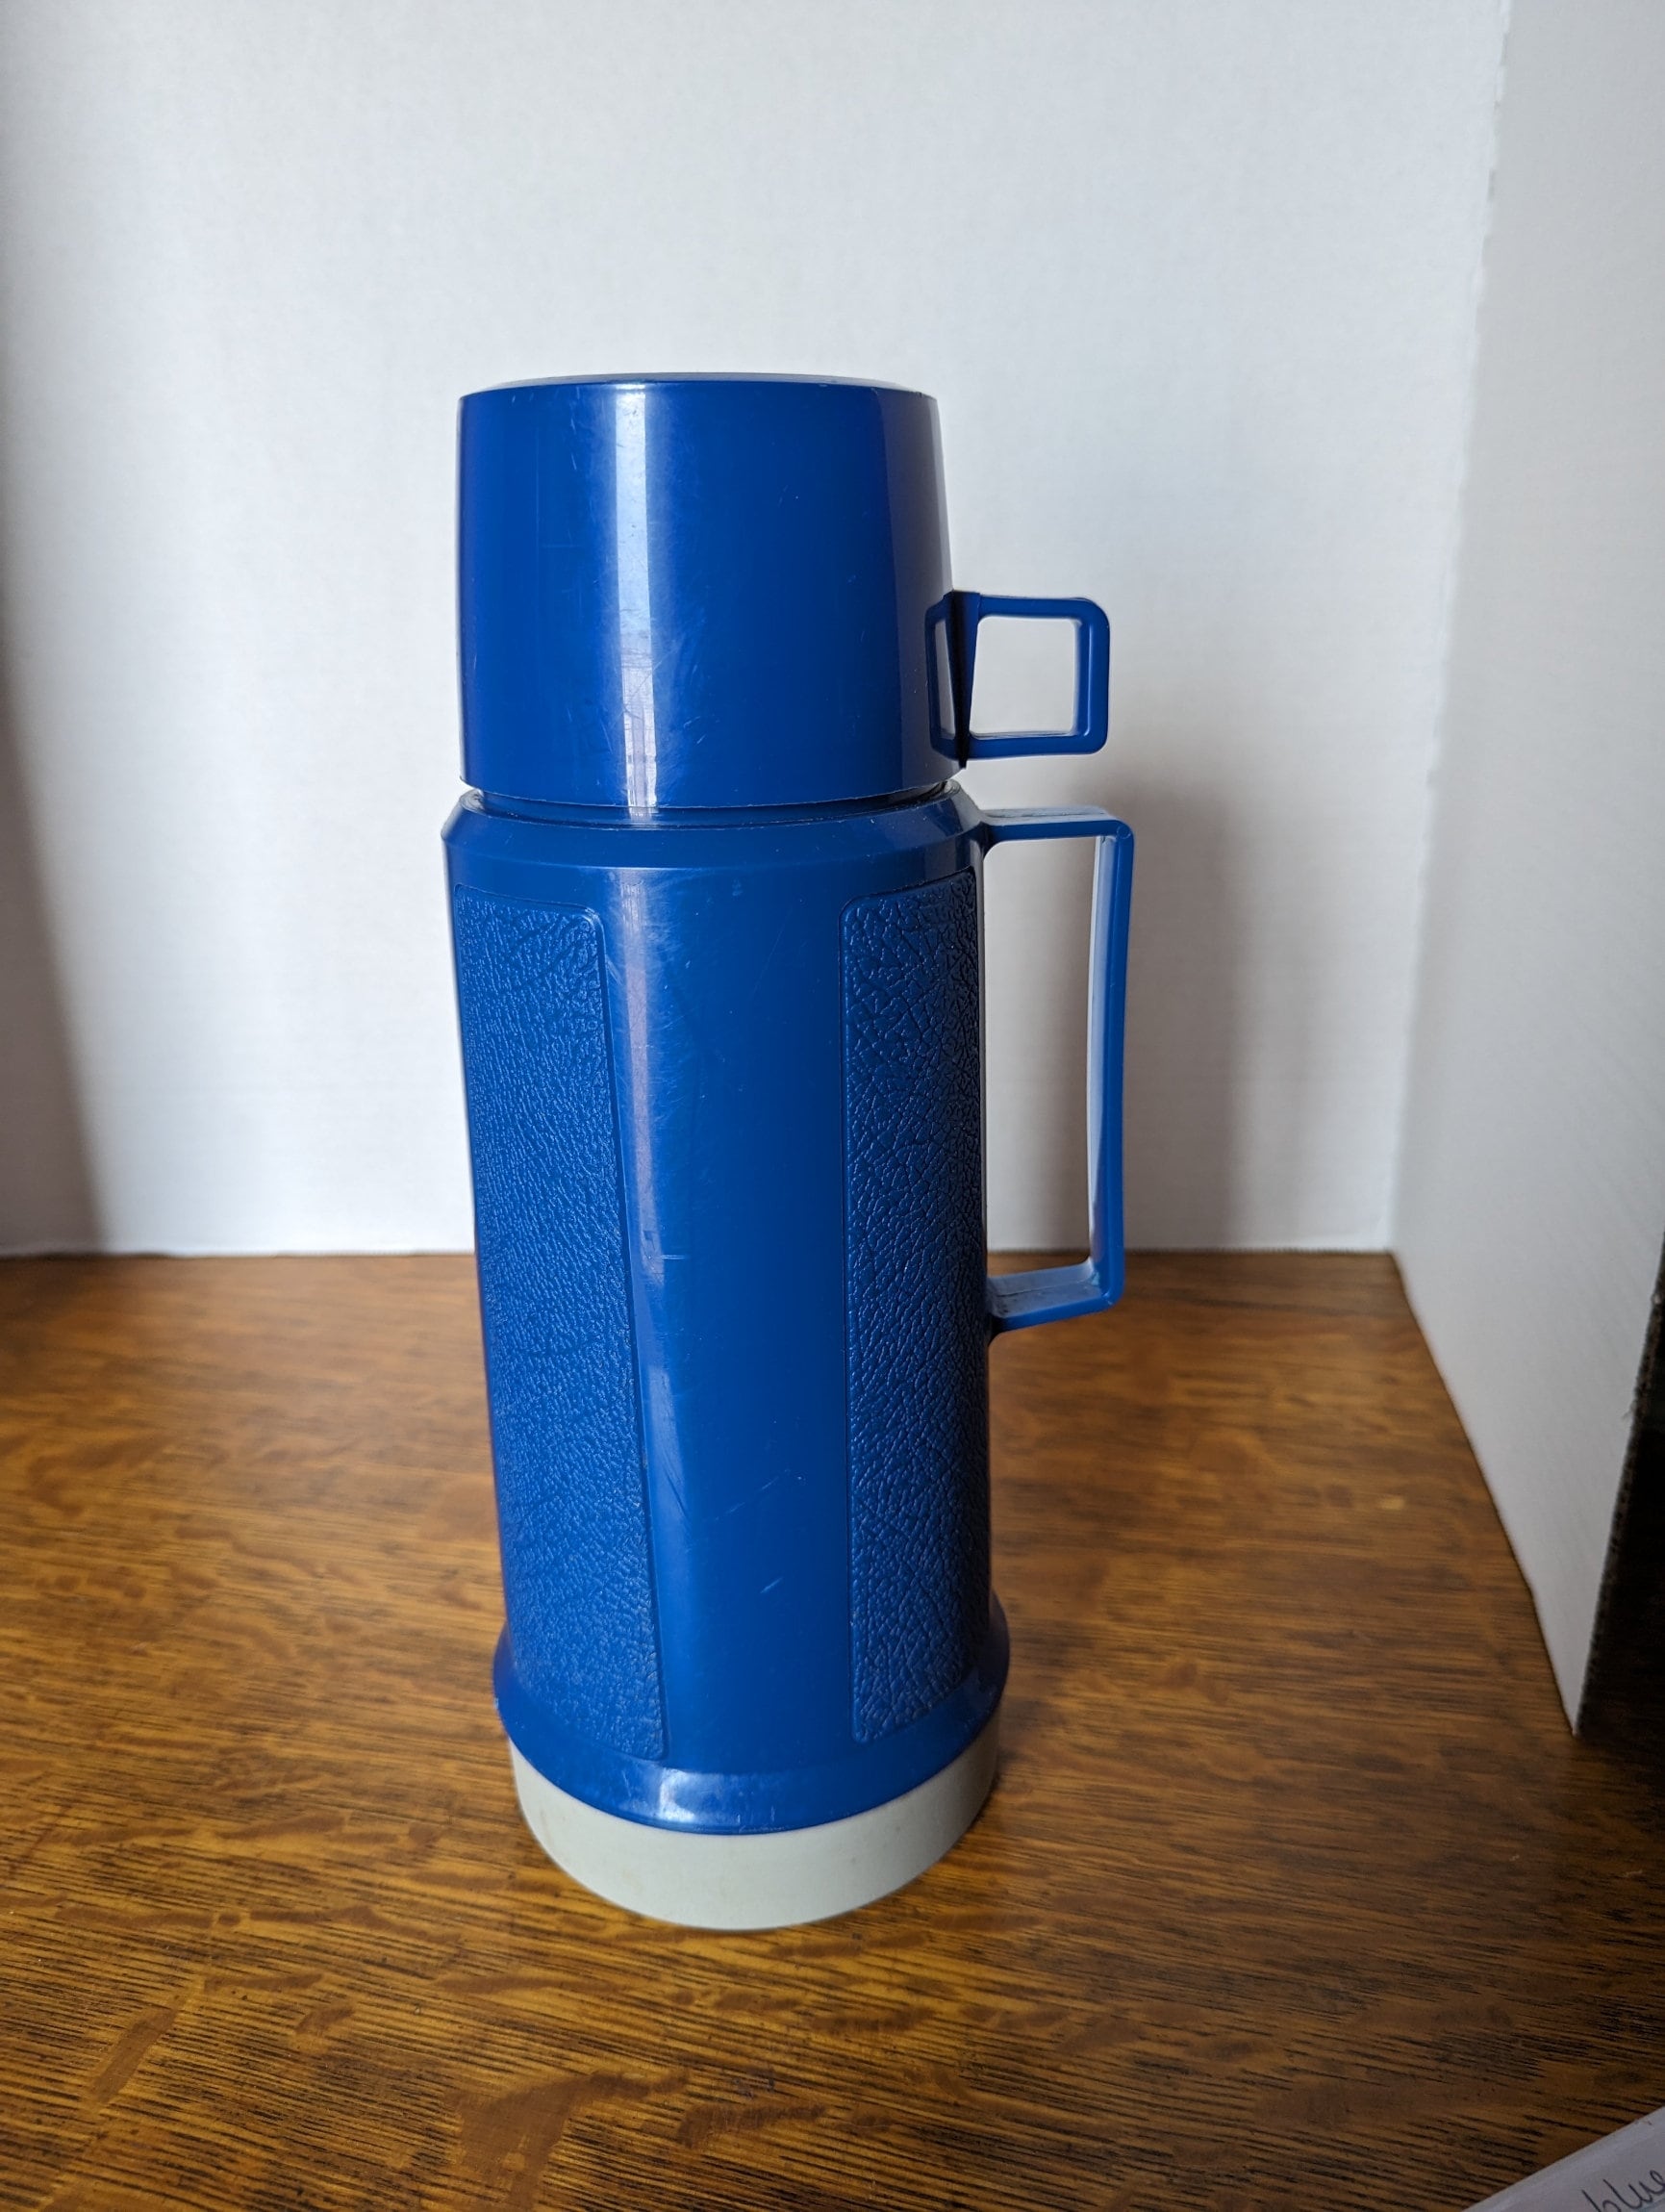 Vintage 1970 Mustard or Baby Blue Thermos Hot Drink Bottles Camping Flask  Retro' Kitchen Decor Collectibles Travel Bottle Farmhouse Decor 